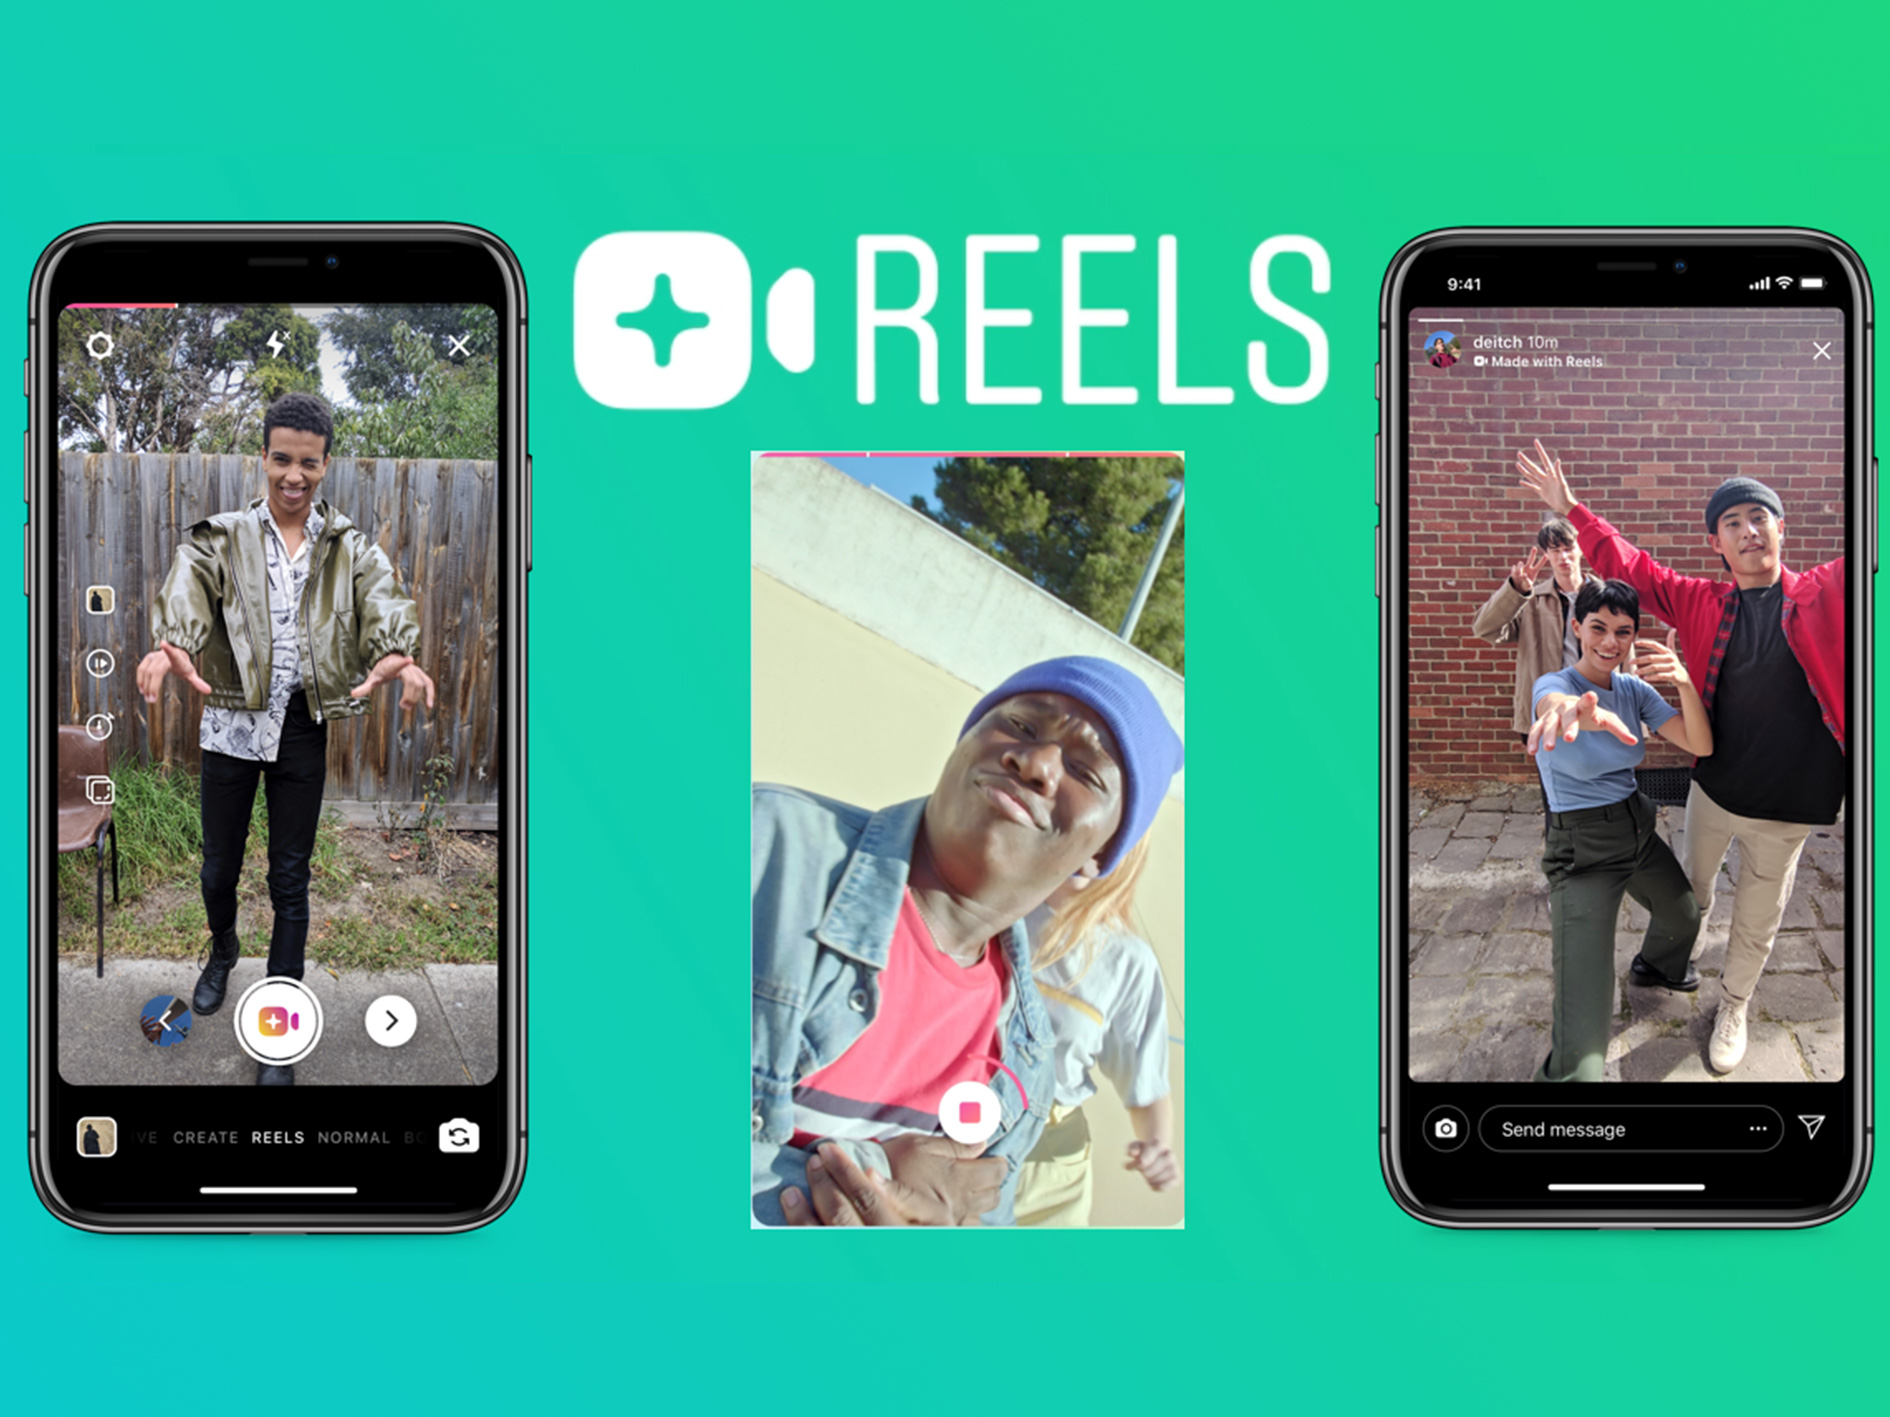 Instagram expands live testing of 90 second reels